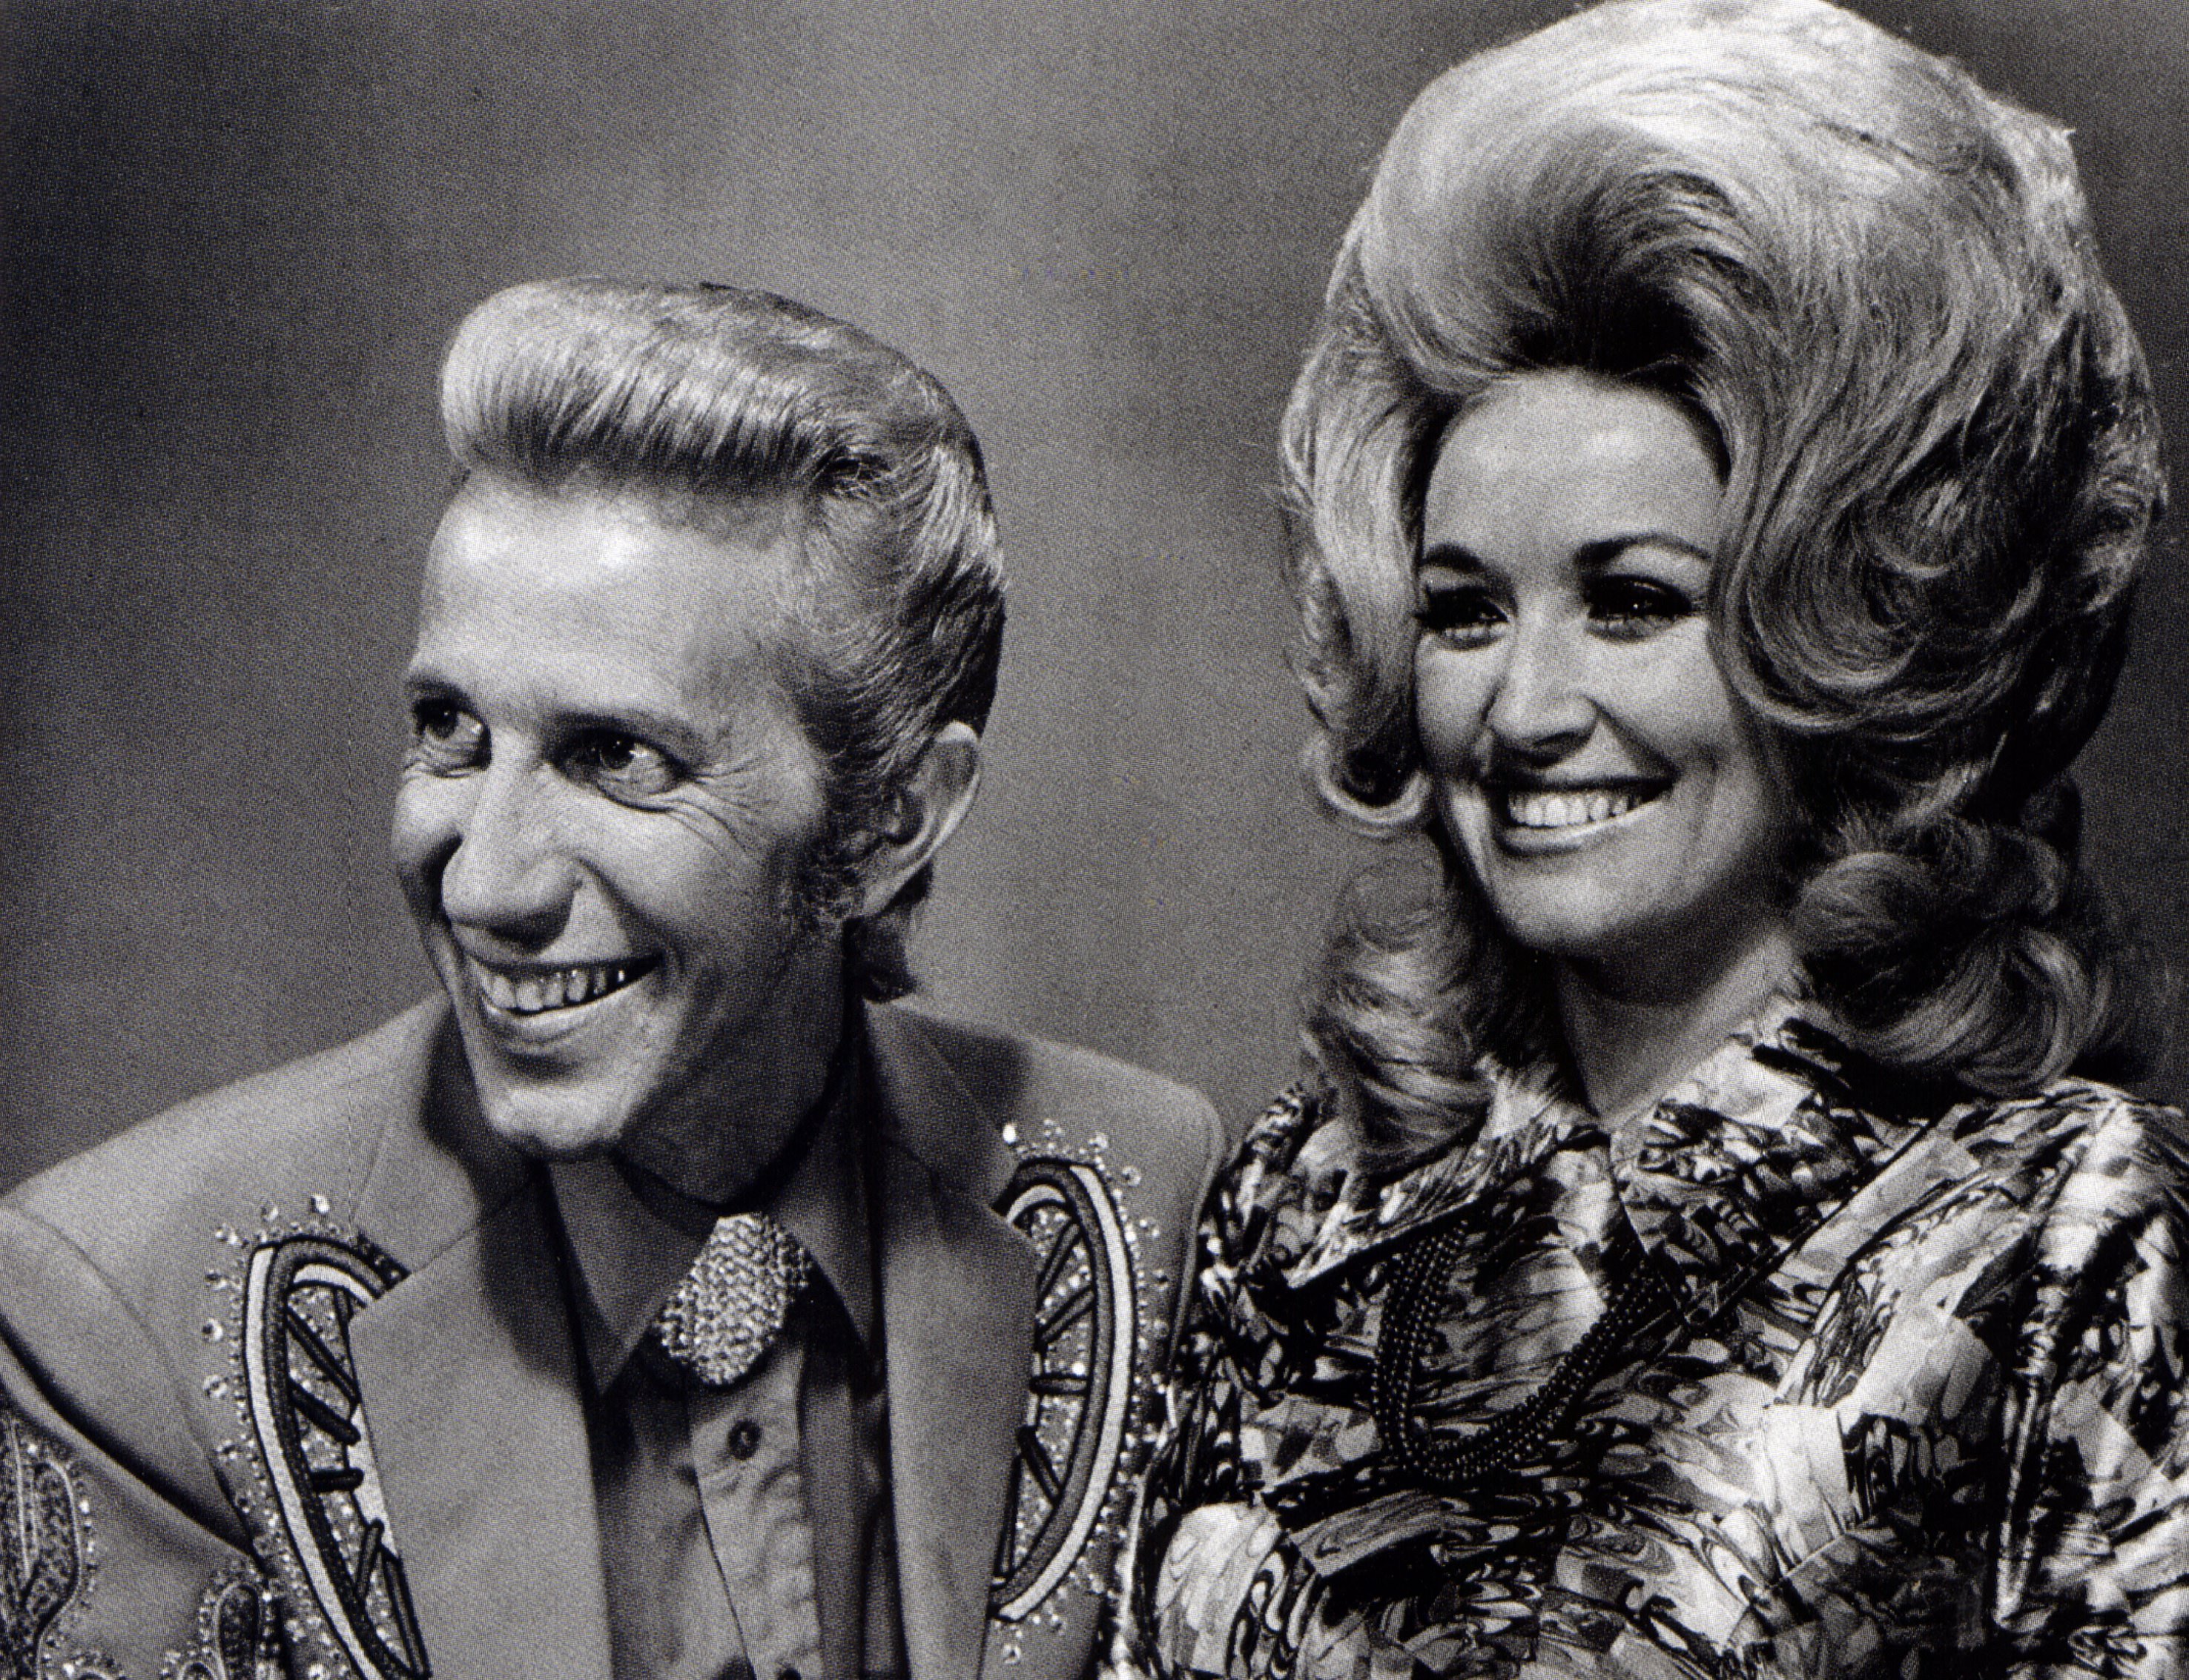 A black and white photo of Porter Wagoner and Dolly Parton. Wagoner wears a suit and Parton wears a patterned blouse.